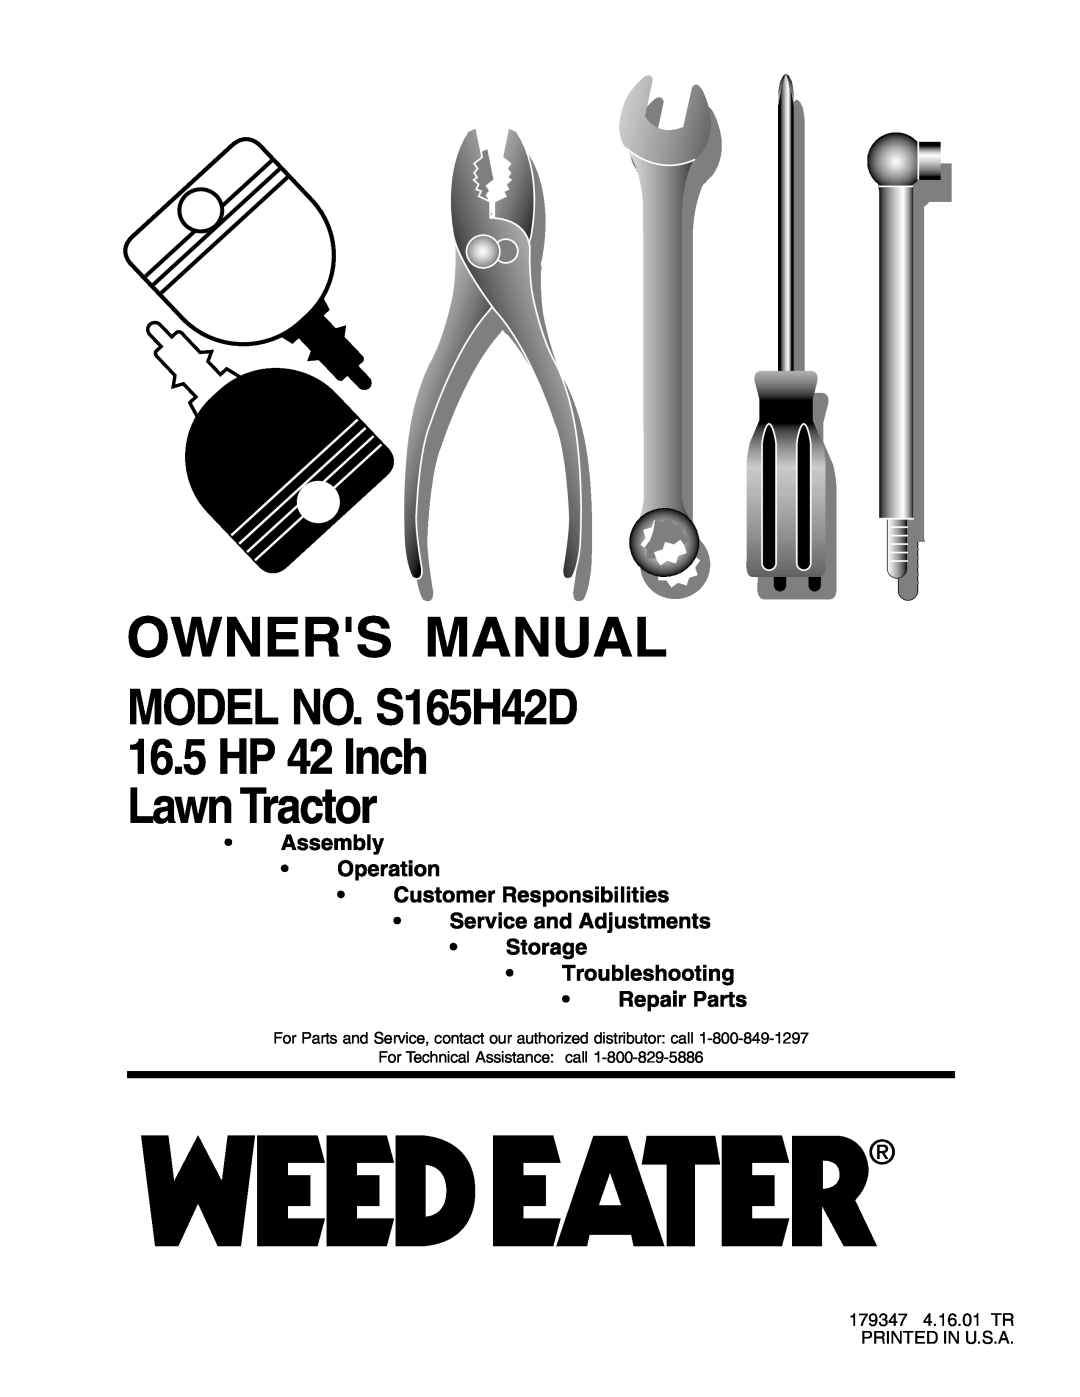 Weed Eater owner manual Owners Manual, MODEL NO. S165H42D 16.5 HP 42 Inch Lawn Tractor 